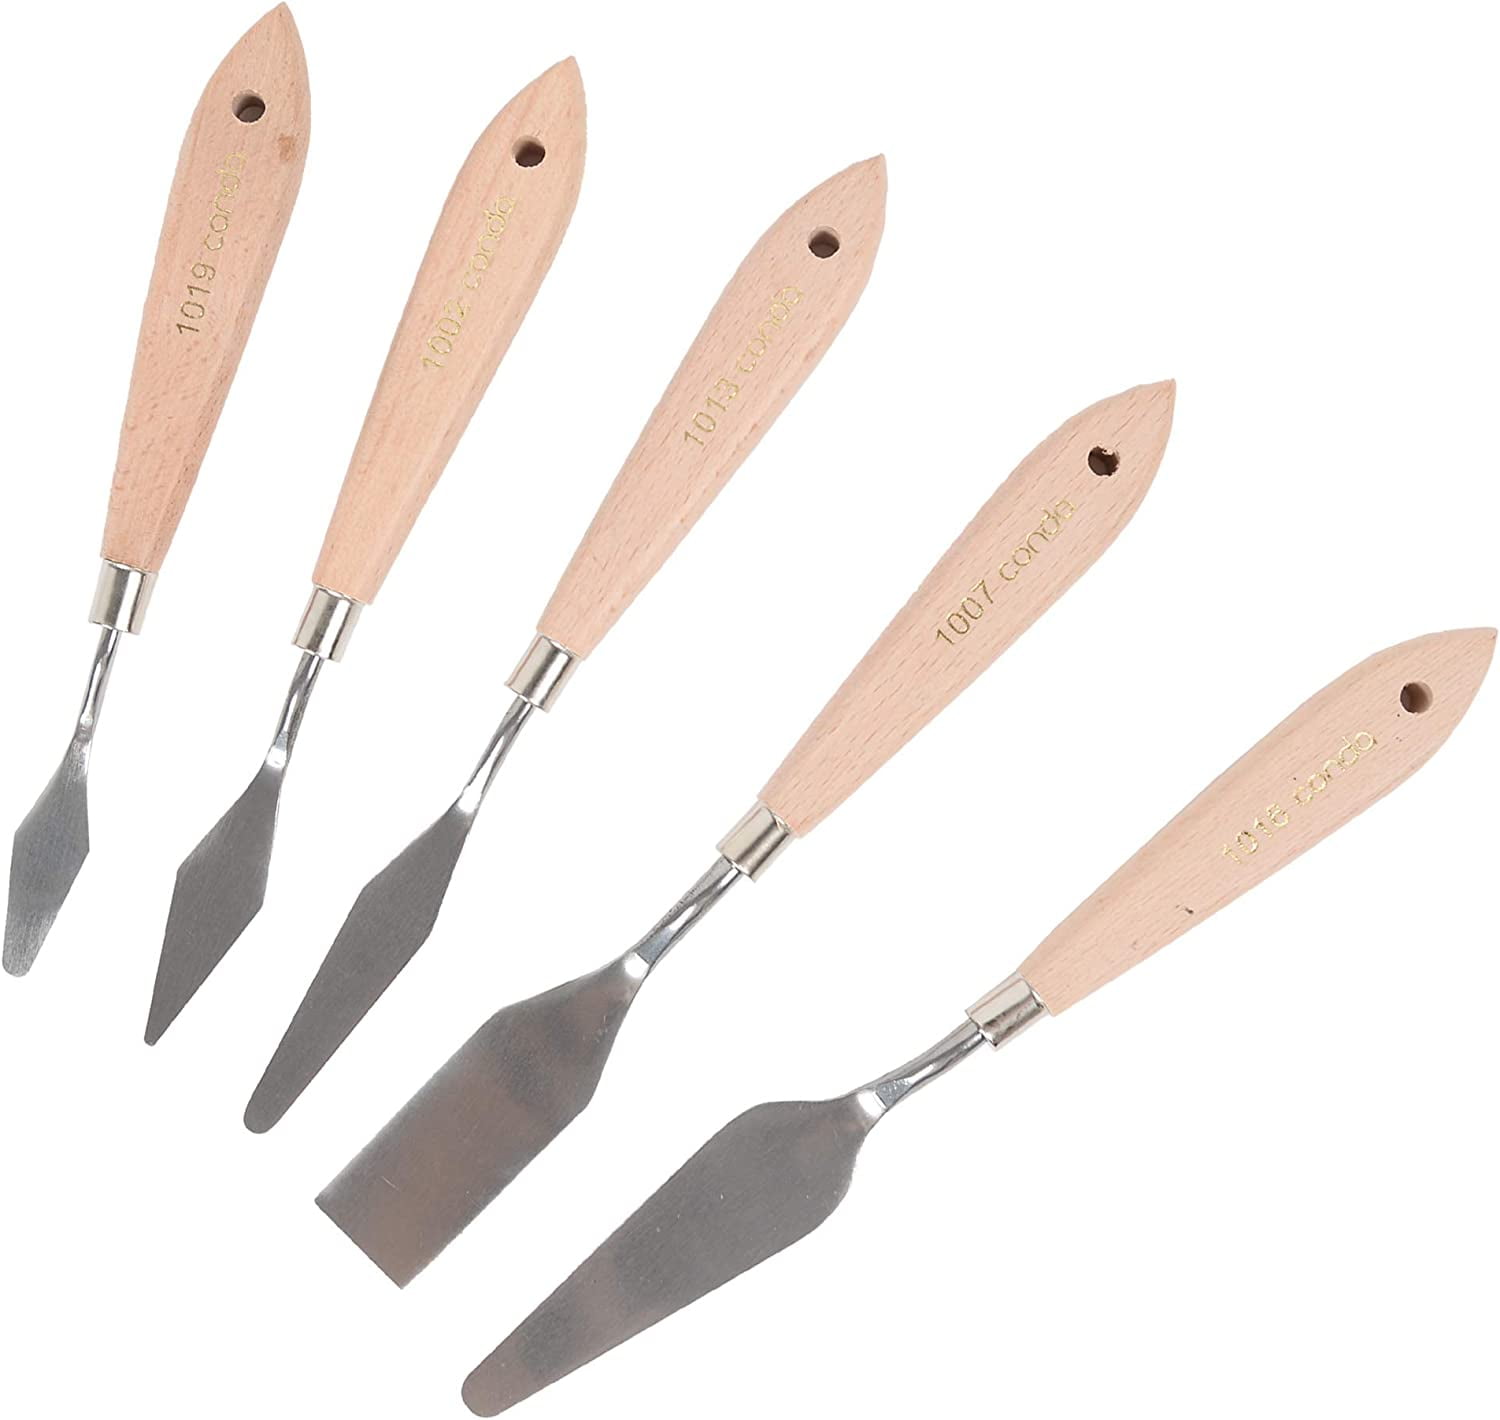 CONDA Artist Palette Knife Set - 5 Pieces Painting Knives for